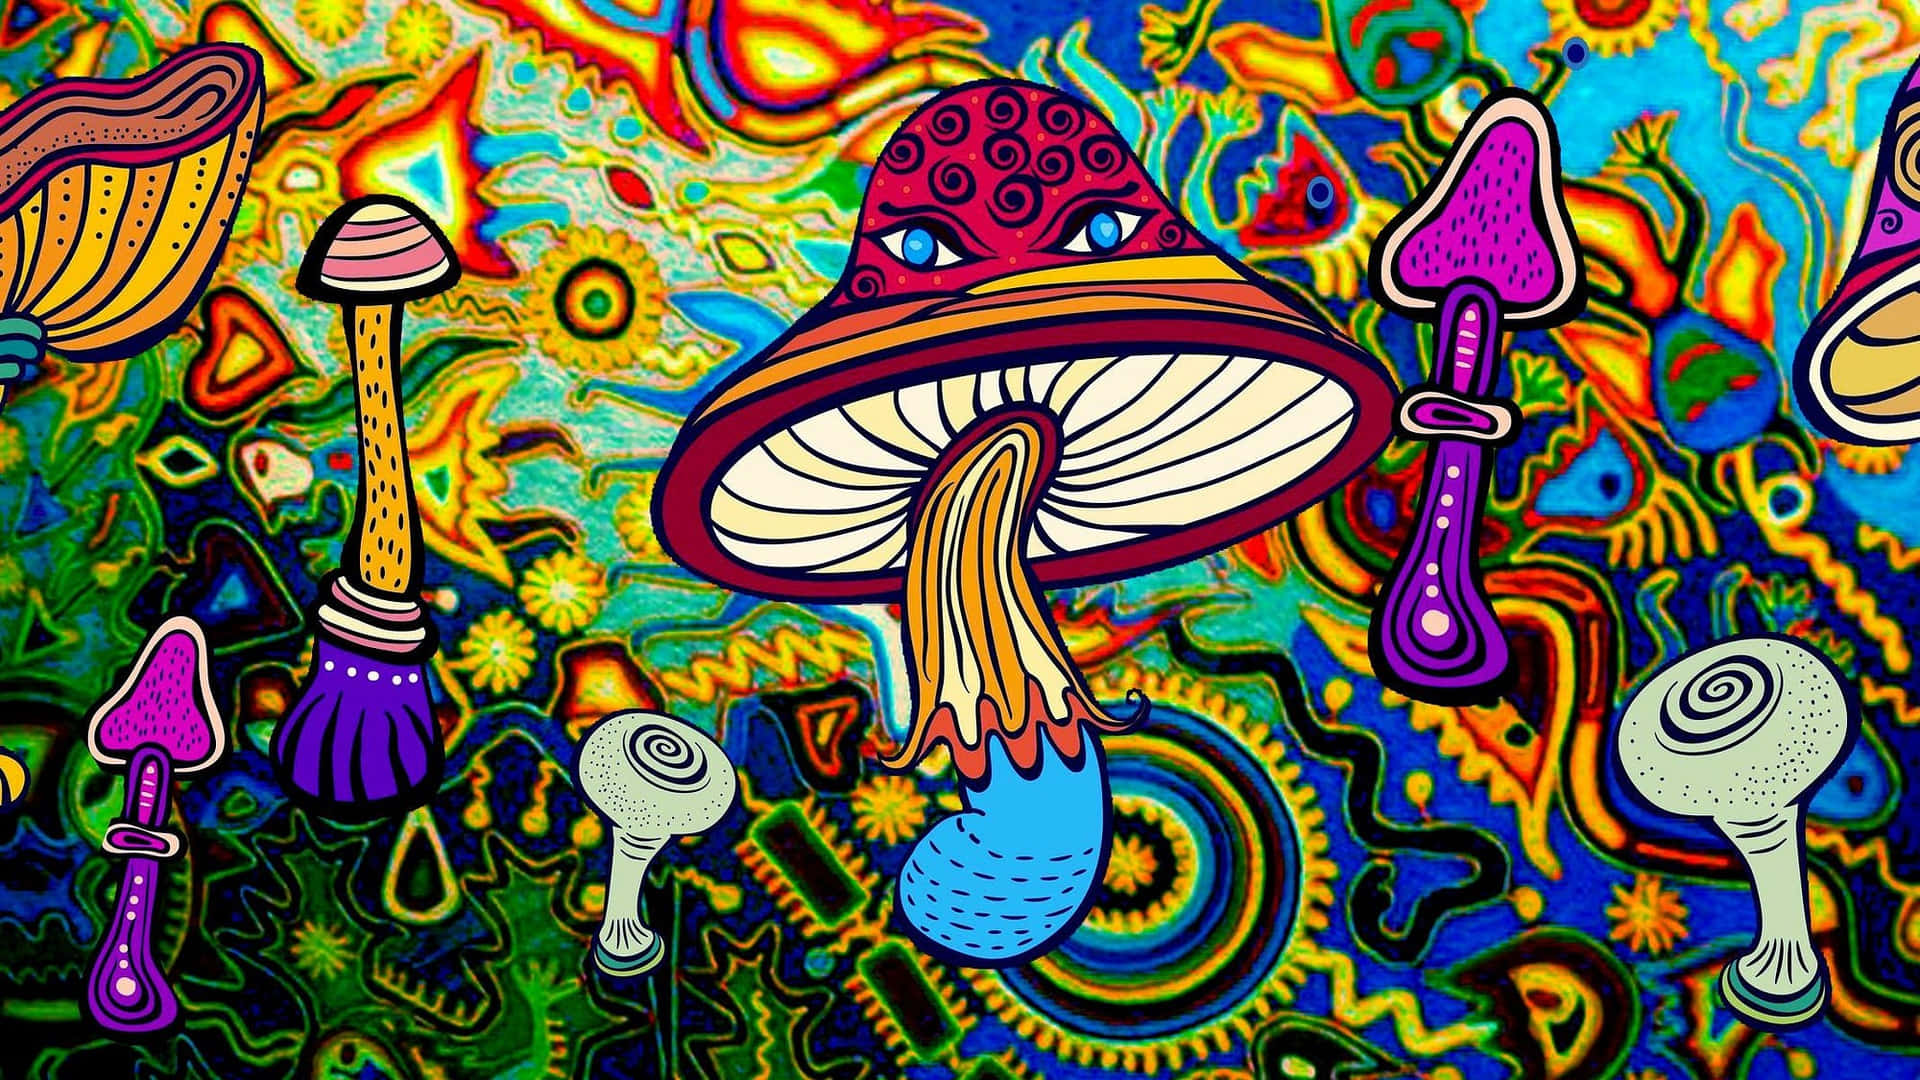 Psychedelic Mushrooms And Other Colorful Objects In A Colorful Background